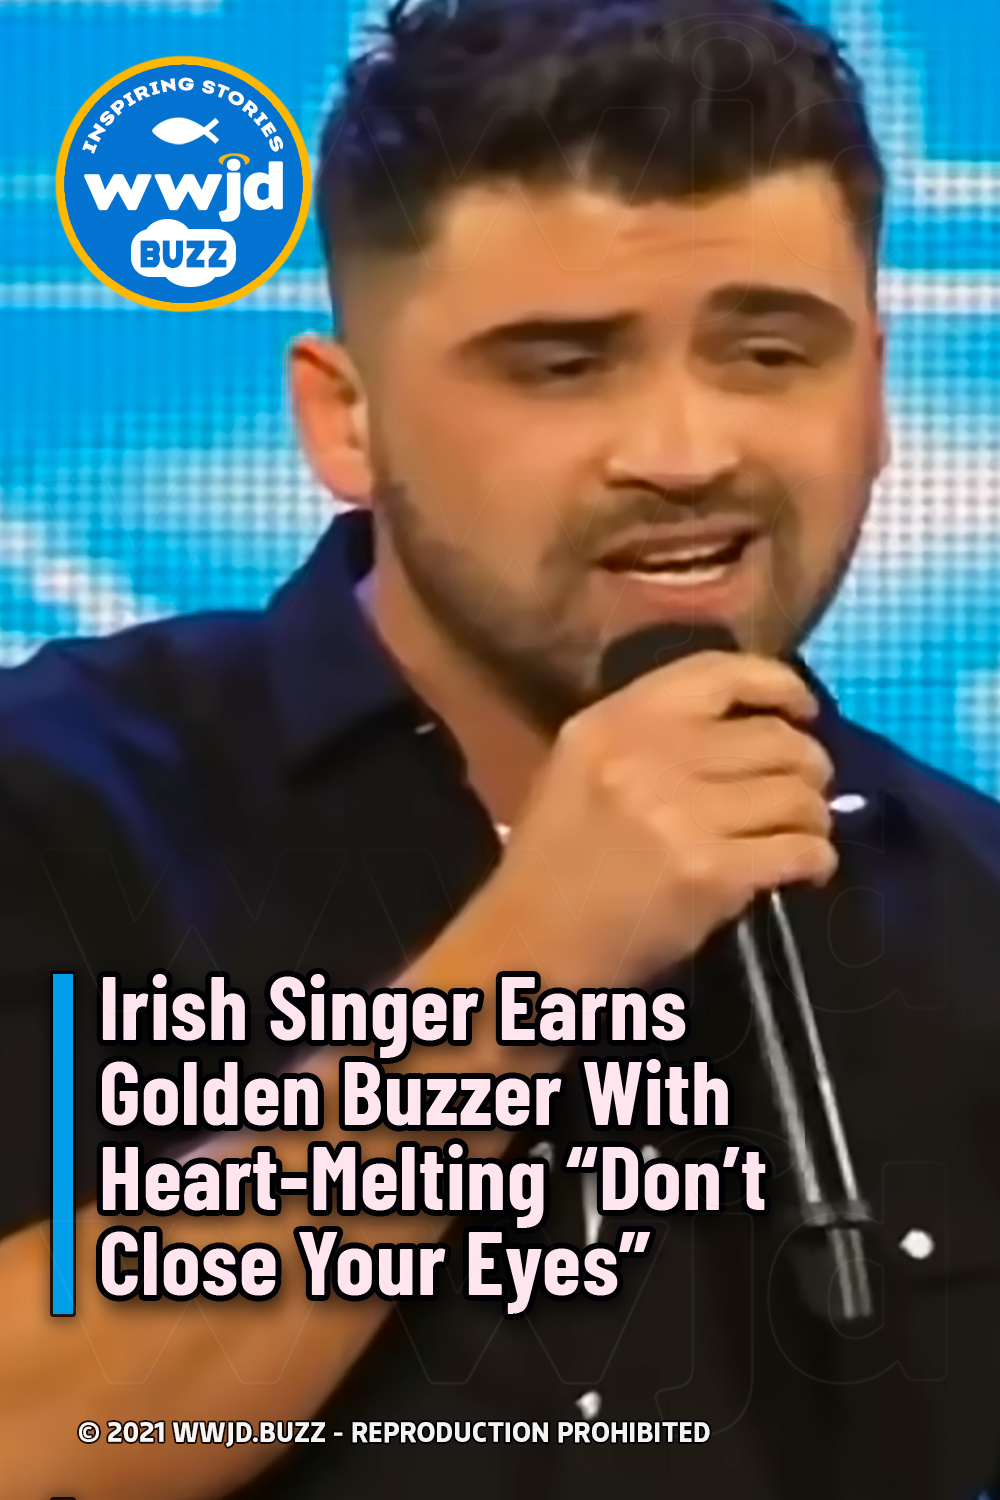 Irish Singer Earns Golden Buzzer With Heart-Melting “Don’t Close Your Eyes”